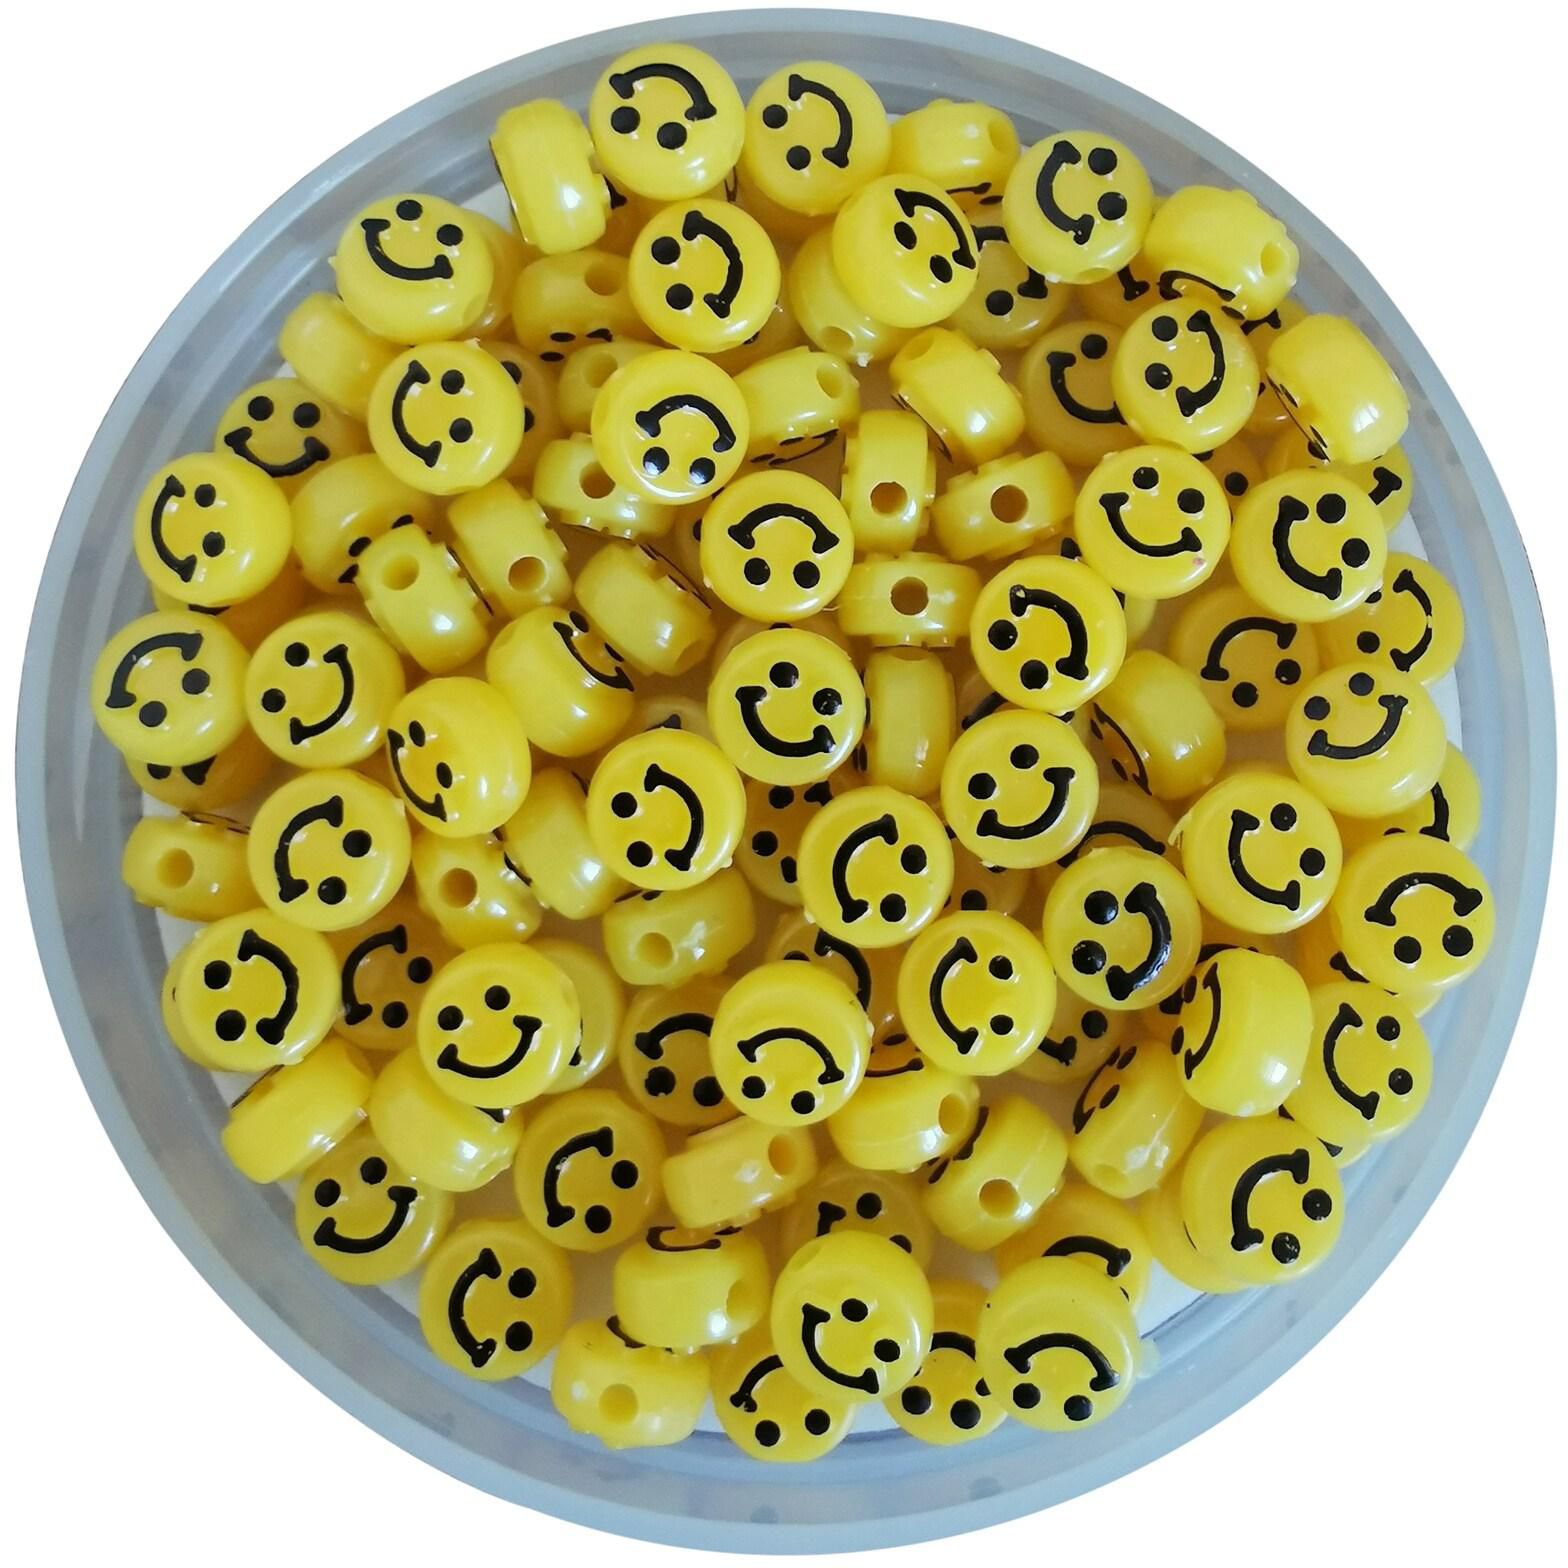 Happy Face Spacer Beads Acrylic Jewelry Accessories 10MM Color Beads With 2 Coils of Crystal Line for DIY Bracelet Necklace Earrings Jewelry Making ( 250 Pcs Pack)